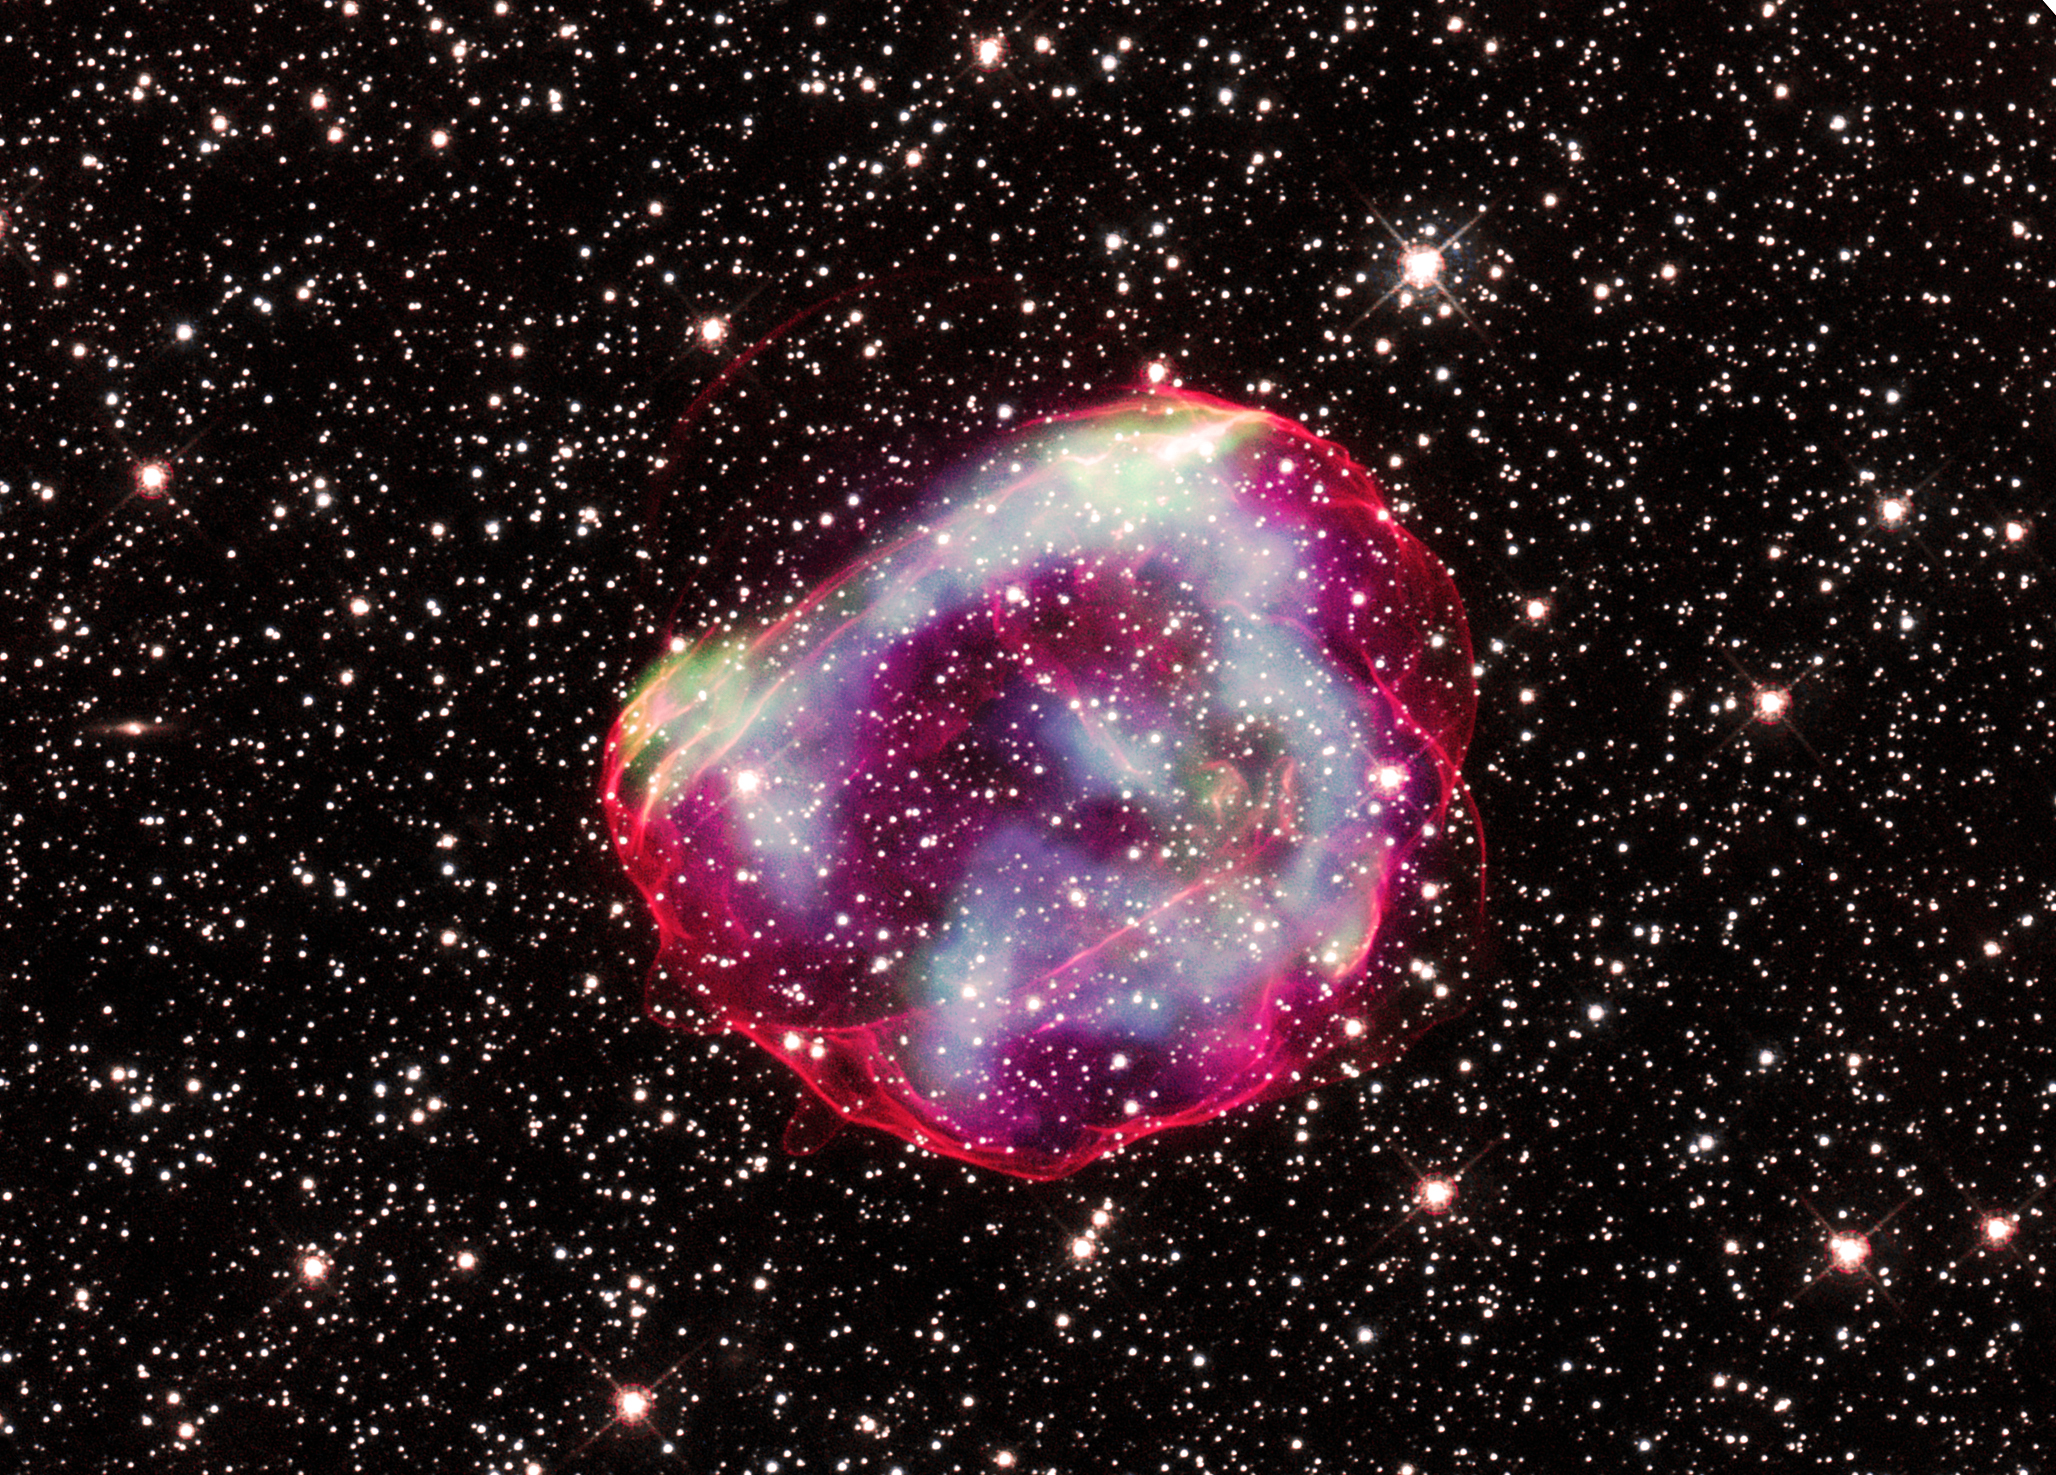 A glowing globular structure of red and blue gas against a backdrop of stars.